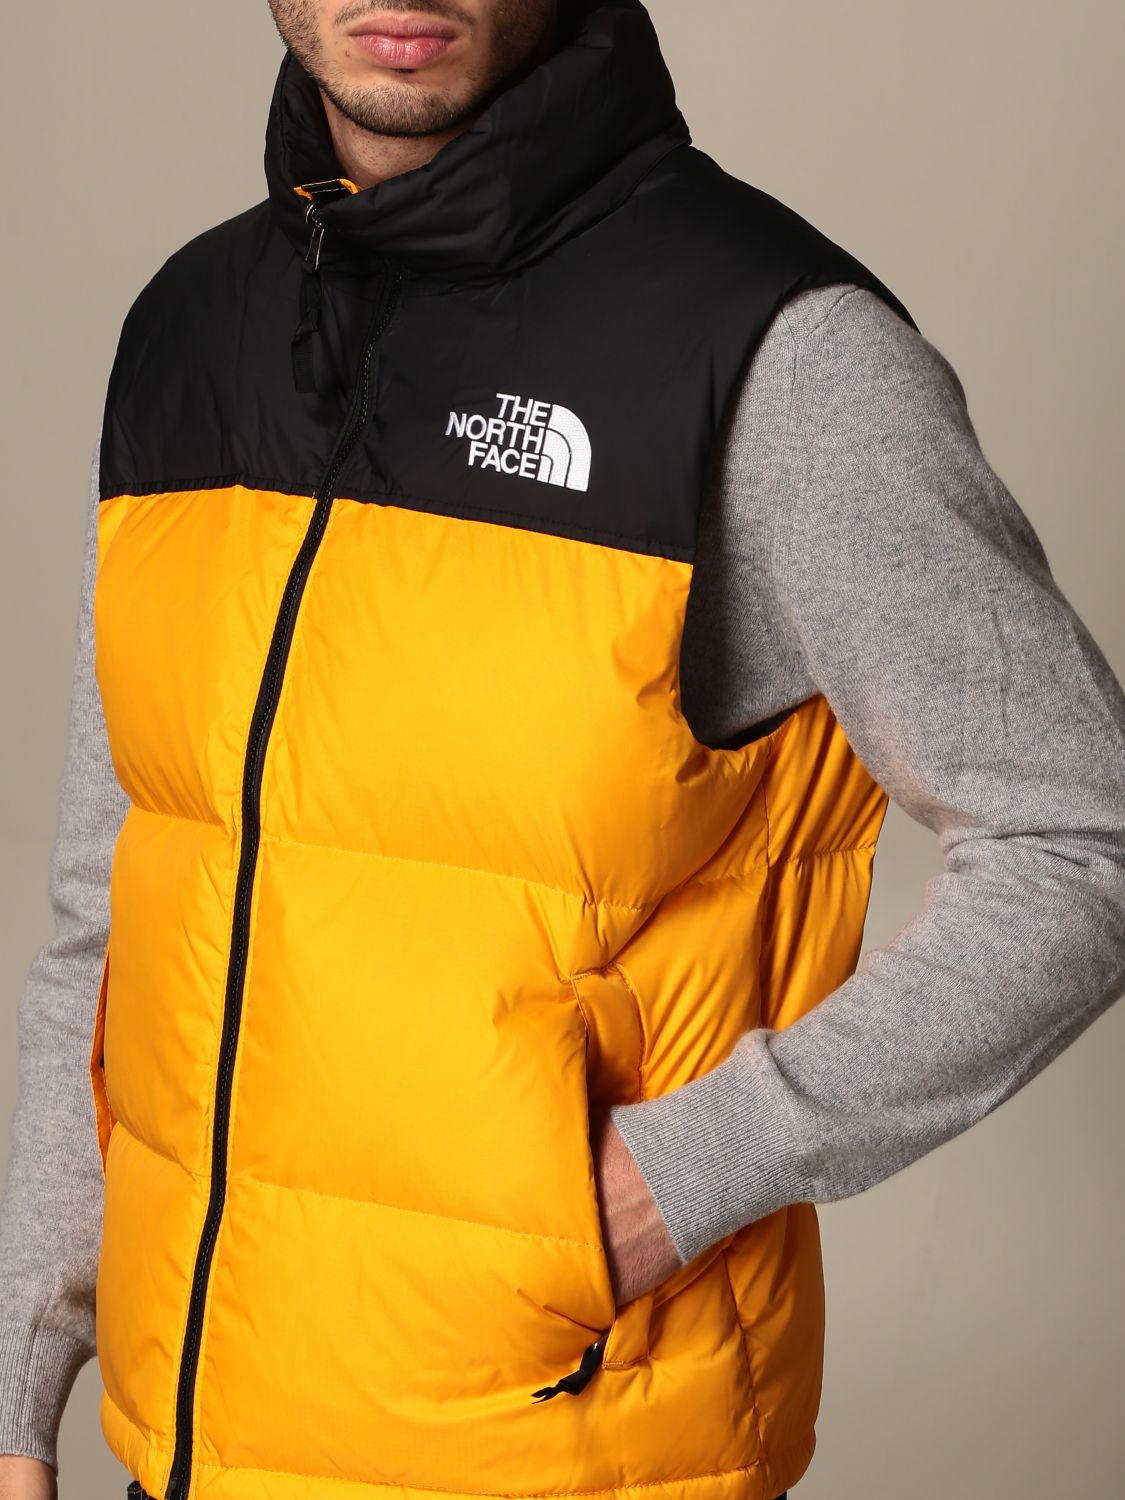 Laughter waste away A faithful THE NORTH FACE: Piumino a gilet bicolor - Giallo | Gilet The North Face  NF0A3JQQ GIGLIO.COM